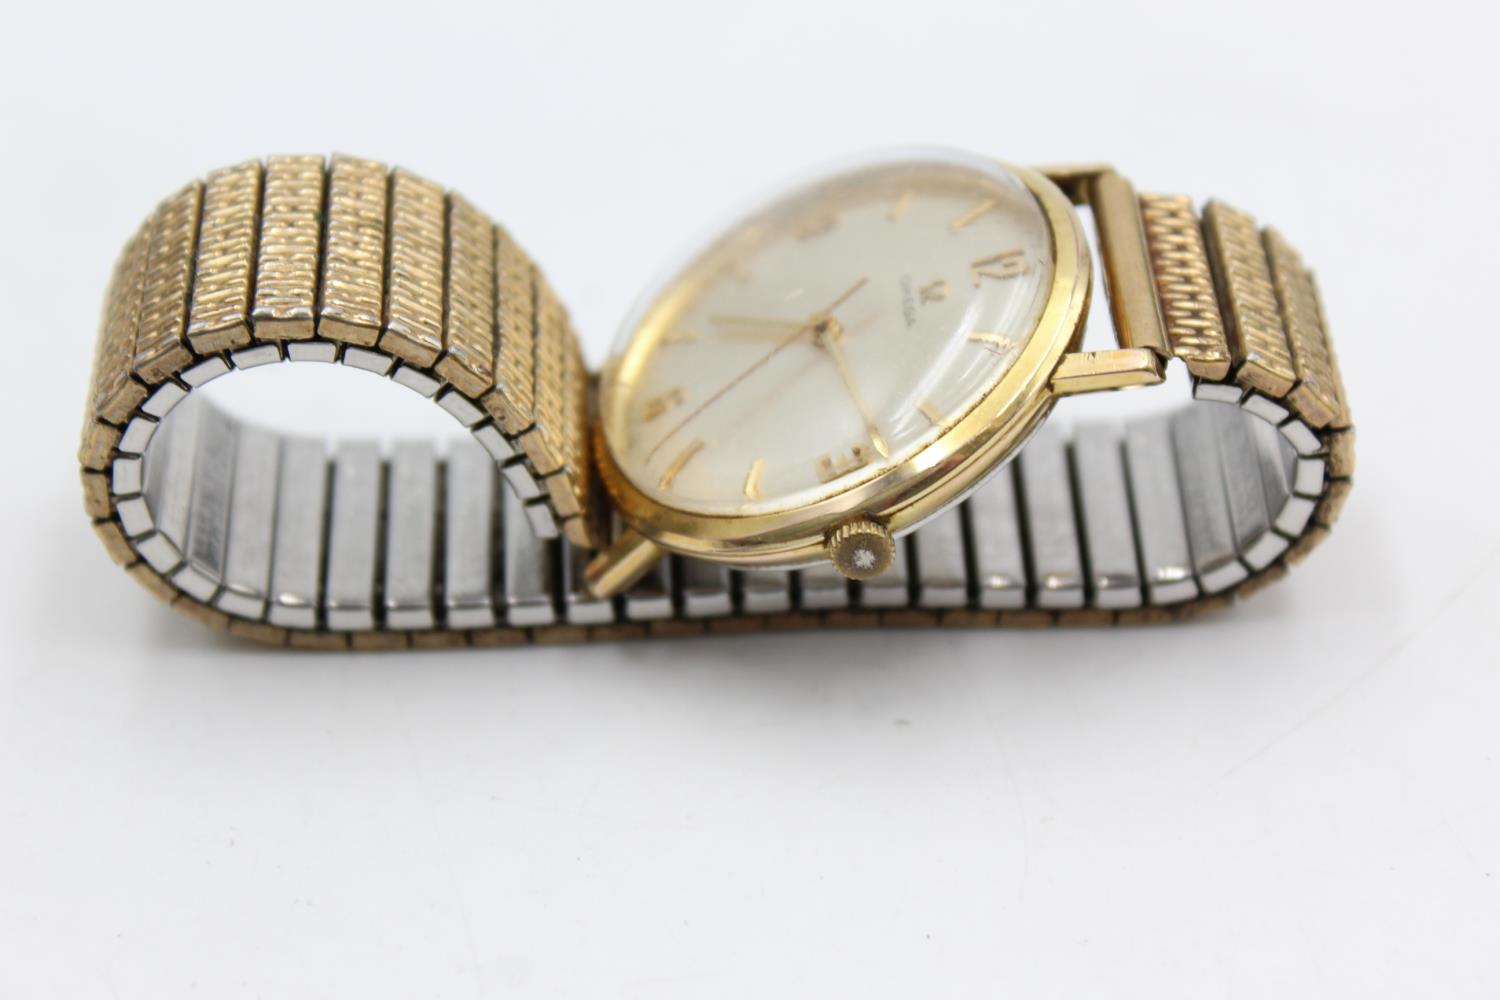 Vintage Gents OMEGA Gold Tone Dress Style WRISTWATCH Hand-Wind WORKING - Image 3 of 5